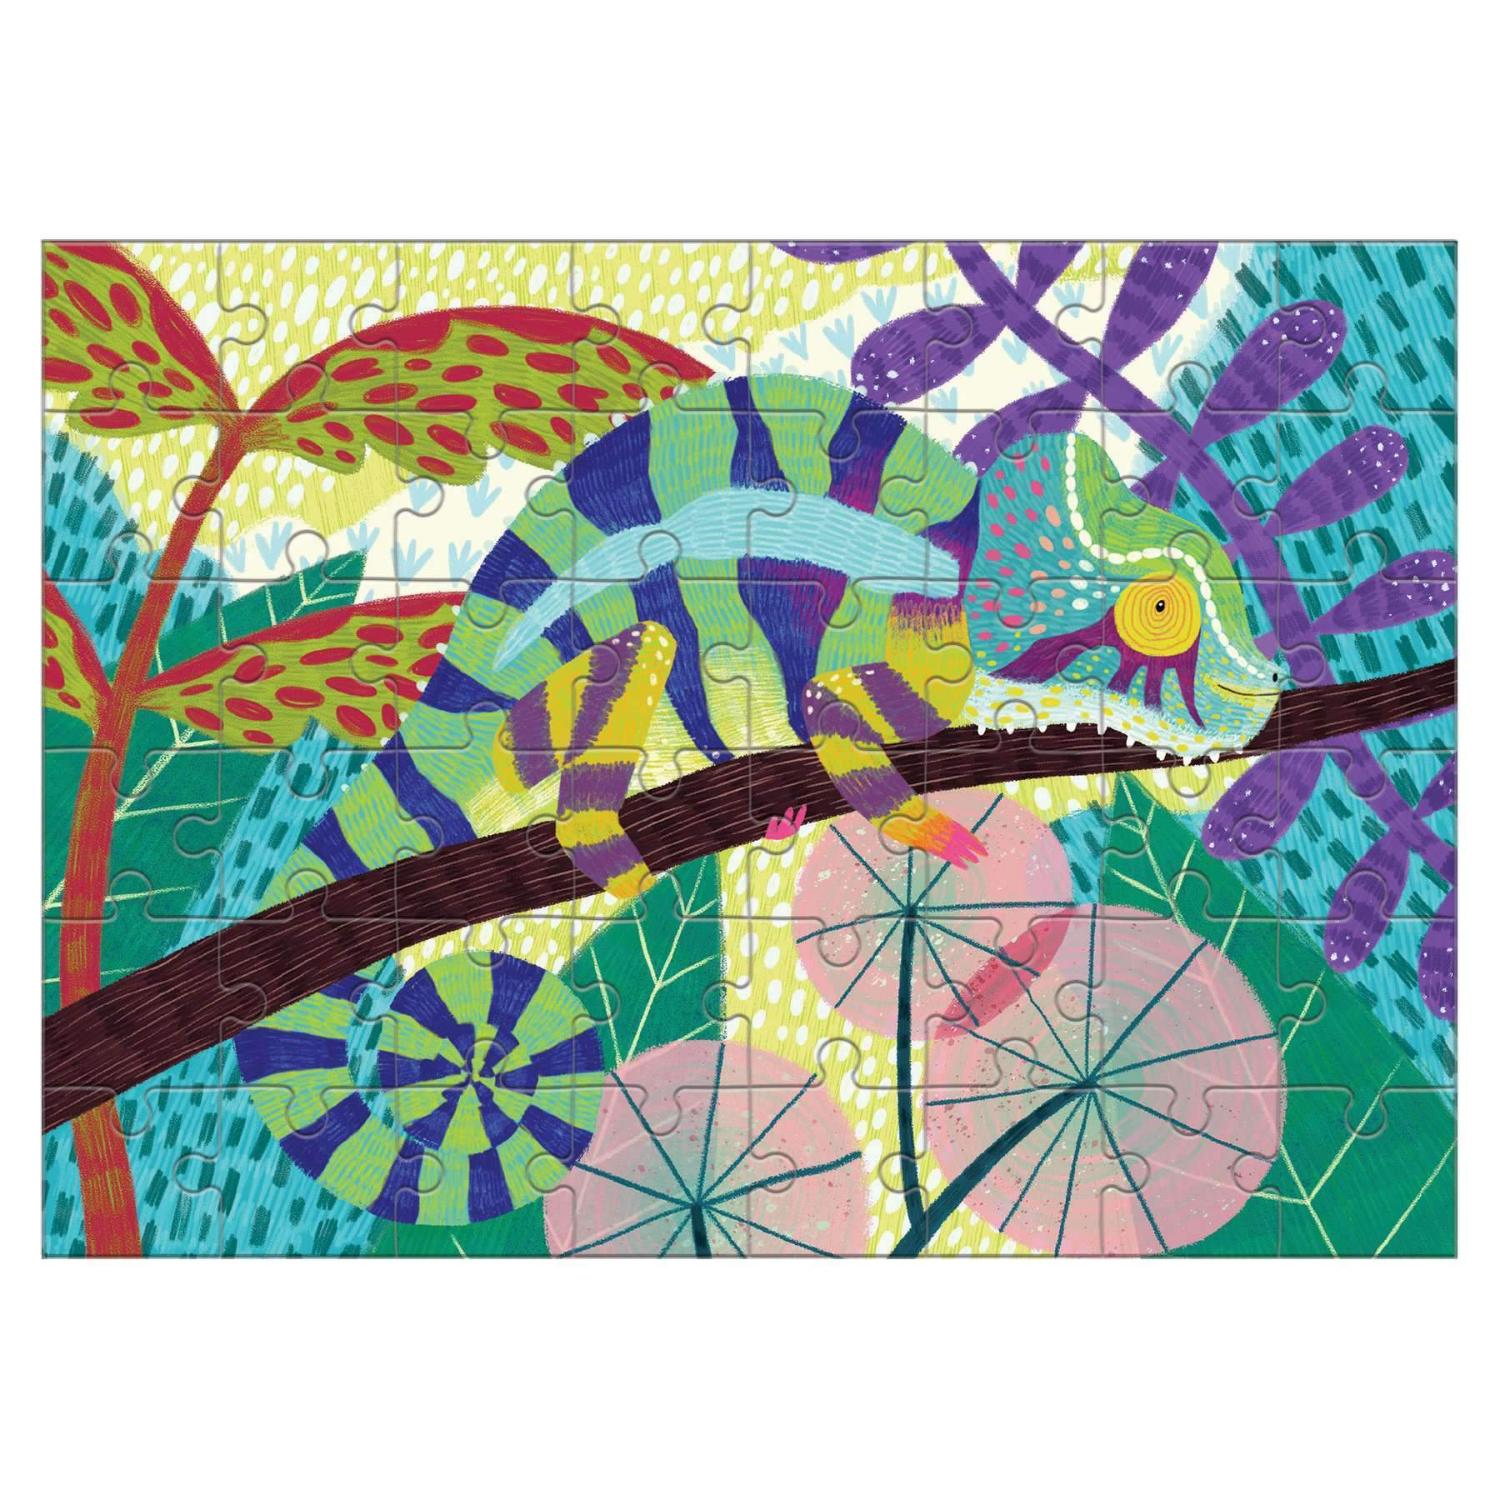 Mudpuppy Panther Chameleon Mini Puzzle | Jigsaw Puzzle For Kids | Completed Jigsaw Puzzle | BeoVERDE.ie